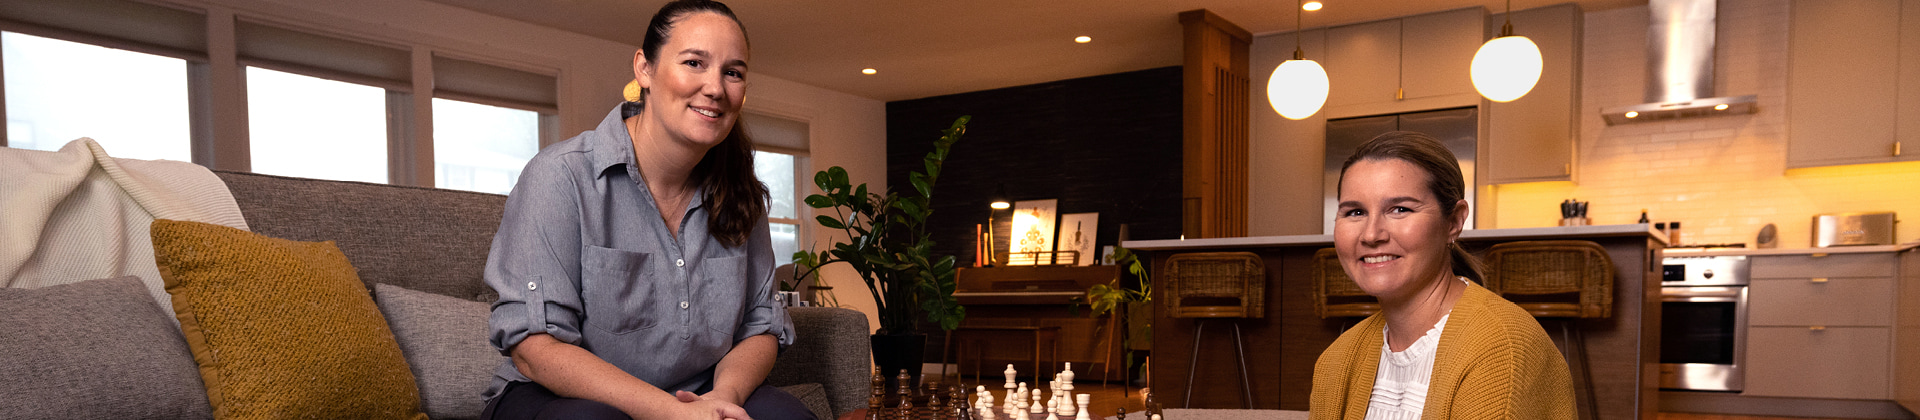 LGBTQ couple playing chess in their home